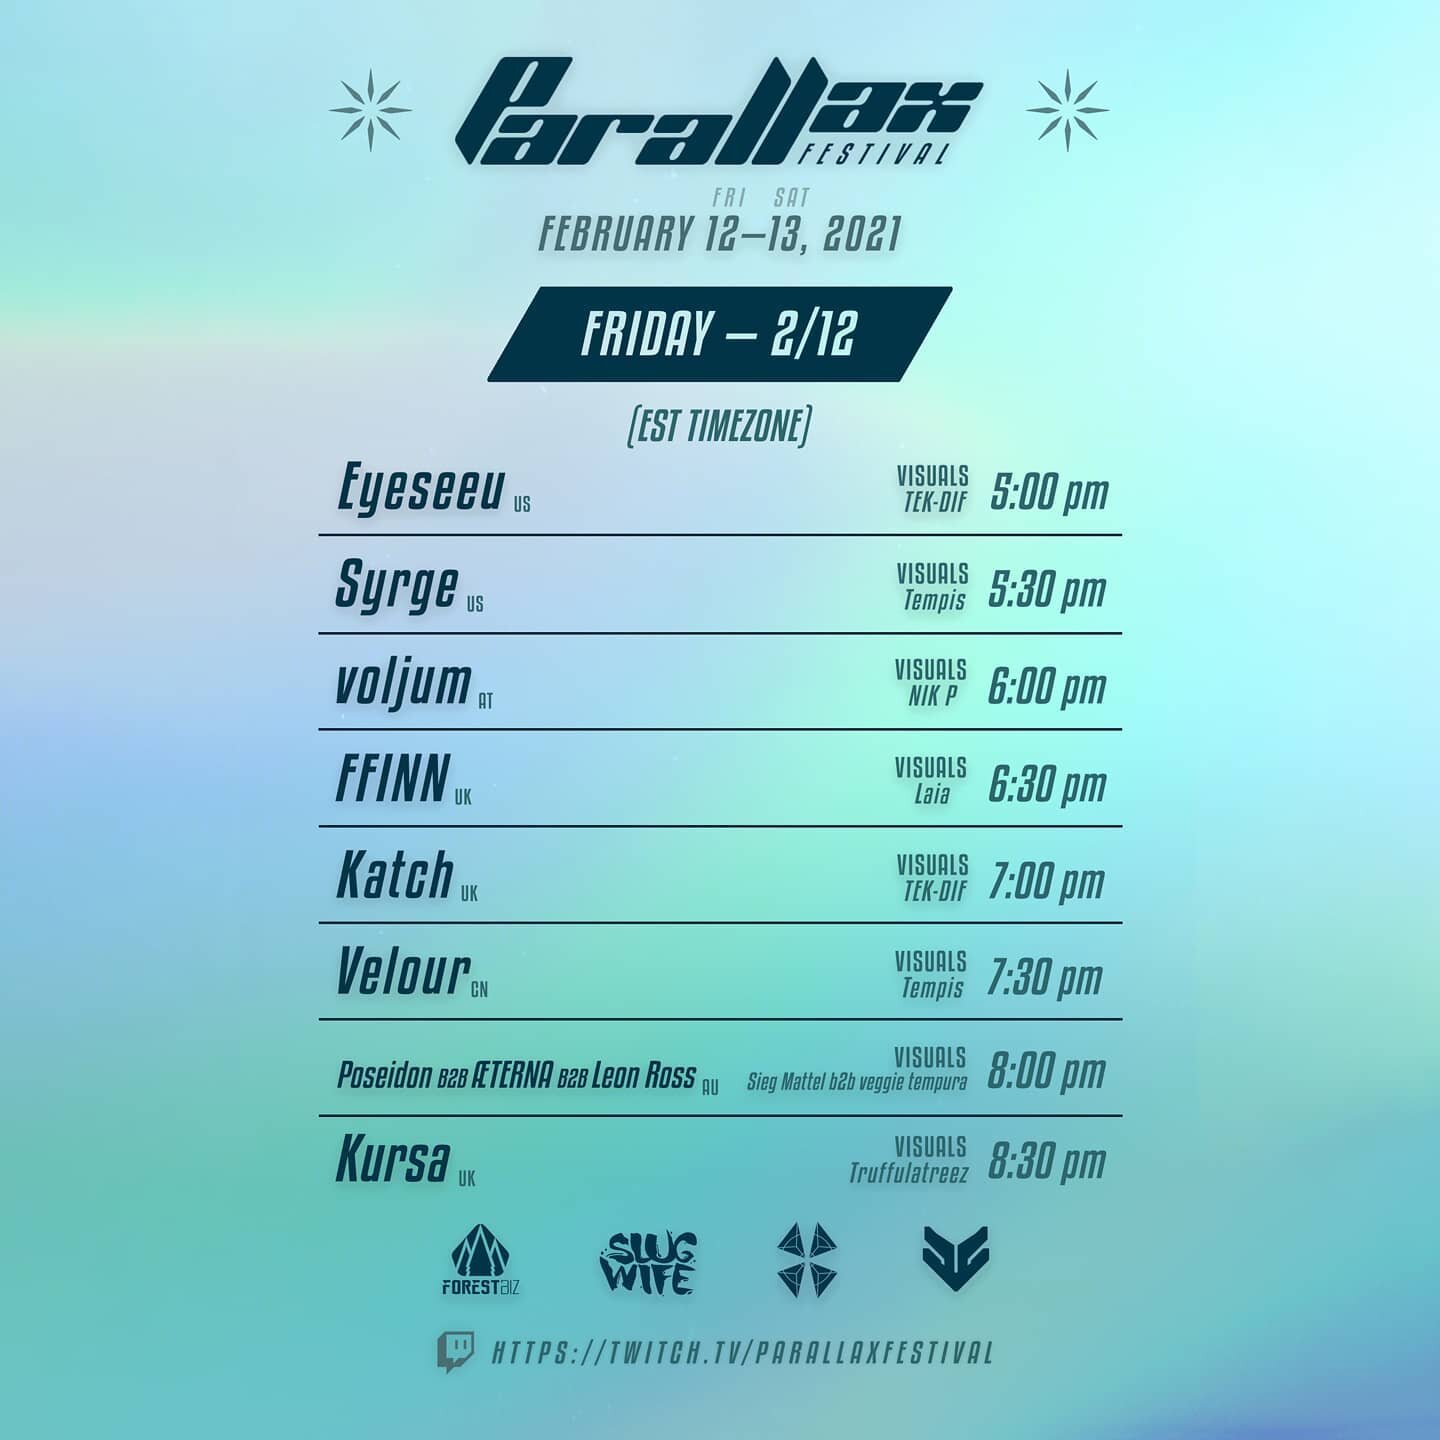 ⊙﹏⊙ Set times (EST) for Day 1 of Parallax Festival ⊙﹏⊙

We highly encourage you to tune in for the whole event, you are guaranteed to discover some new favorite artists!